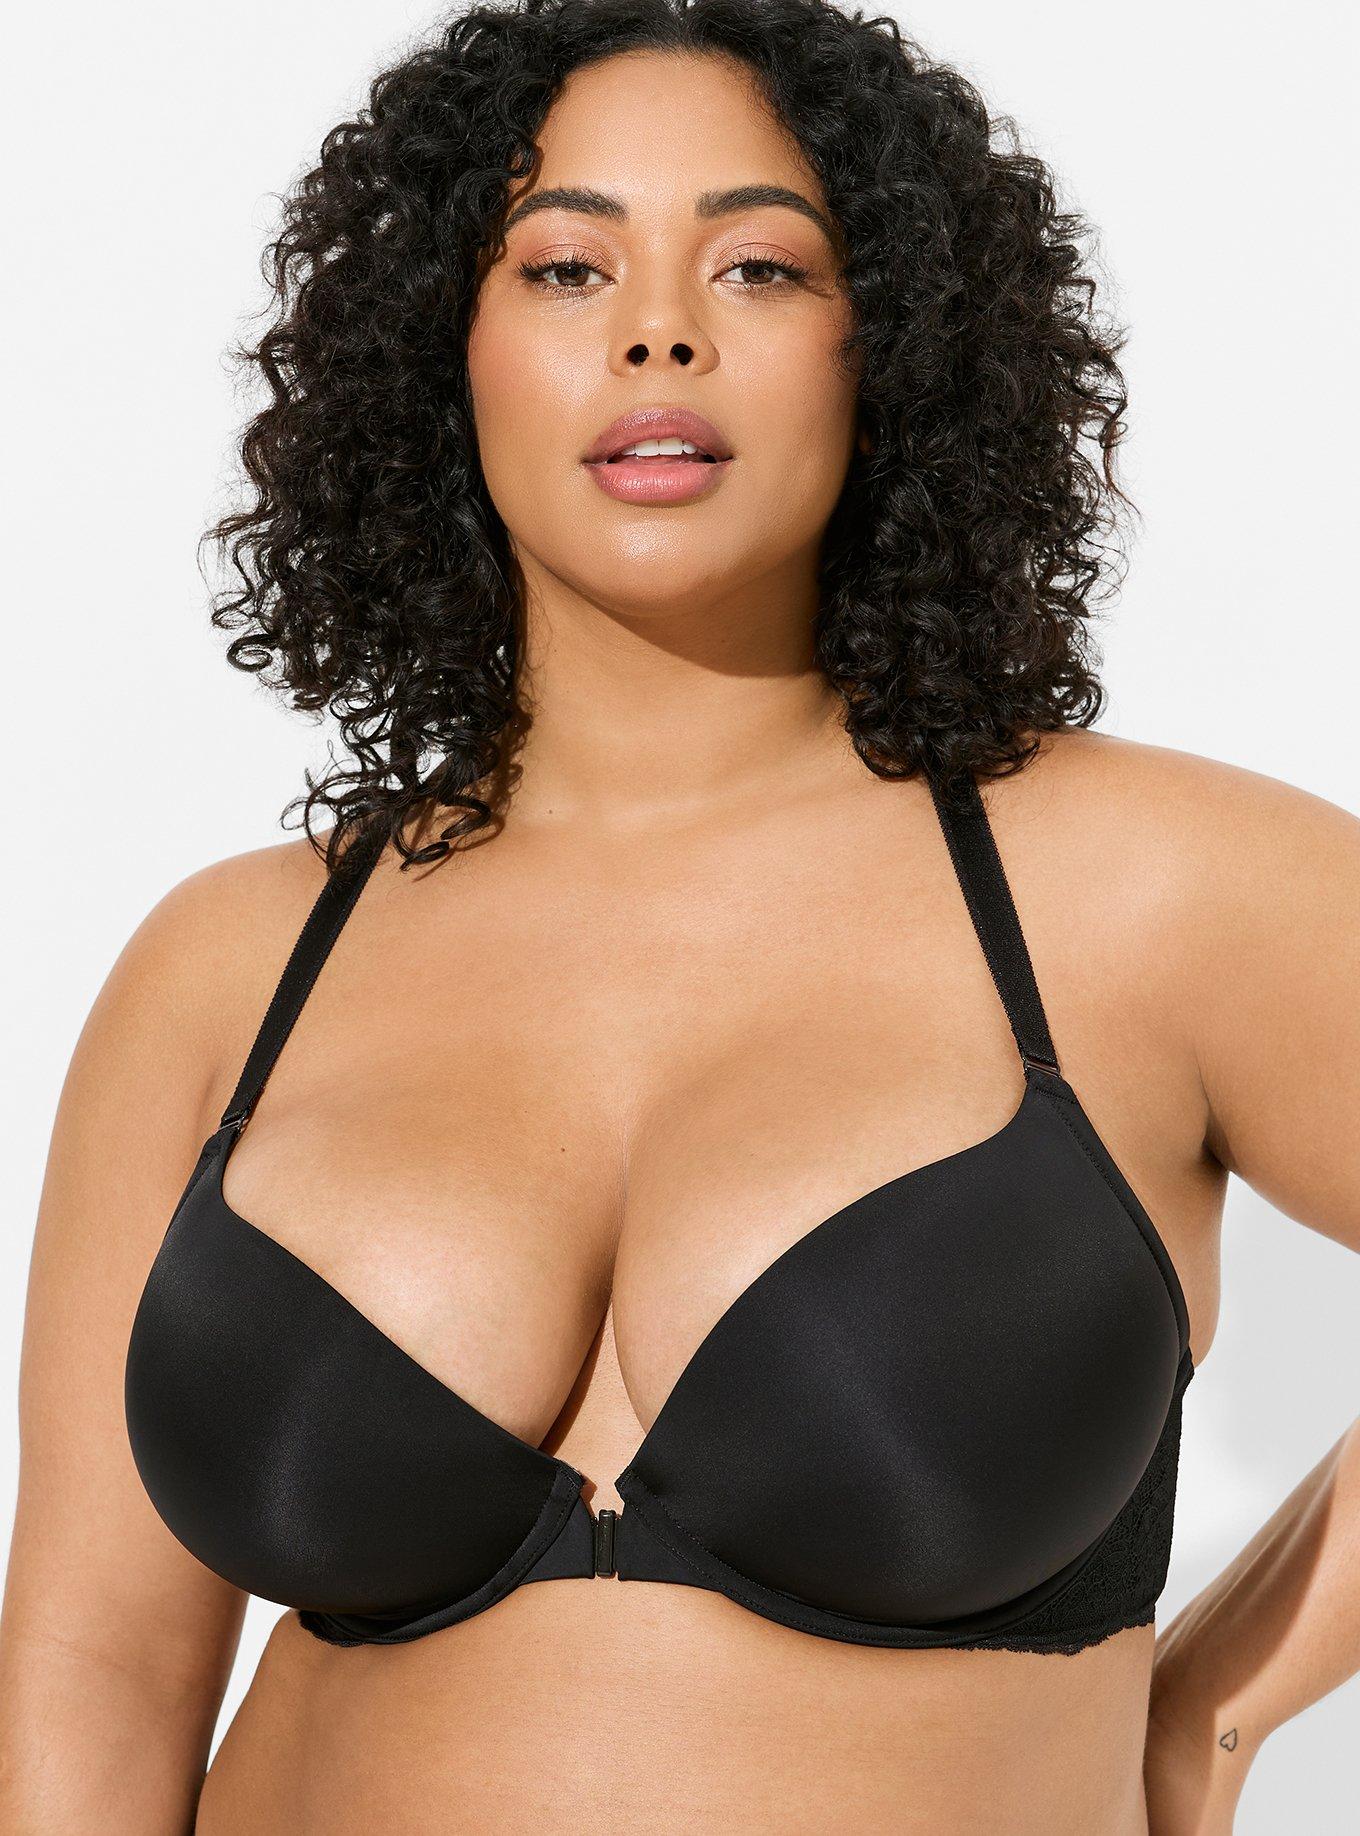 Unbonded Lace Push Up Bra Thick Padded, Sexy Plunge Plus Size